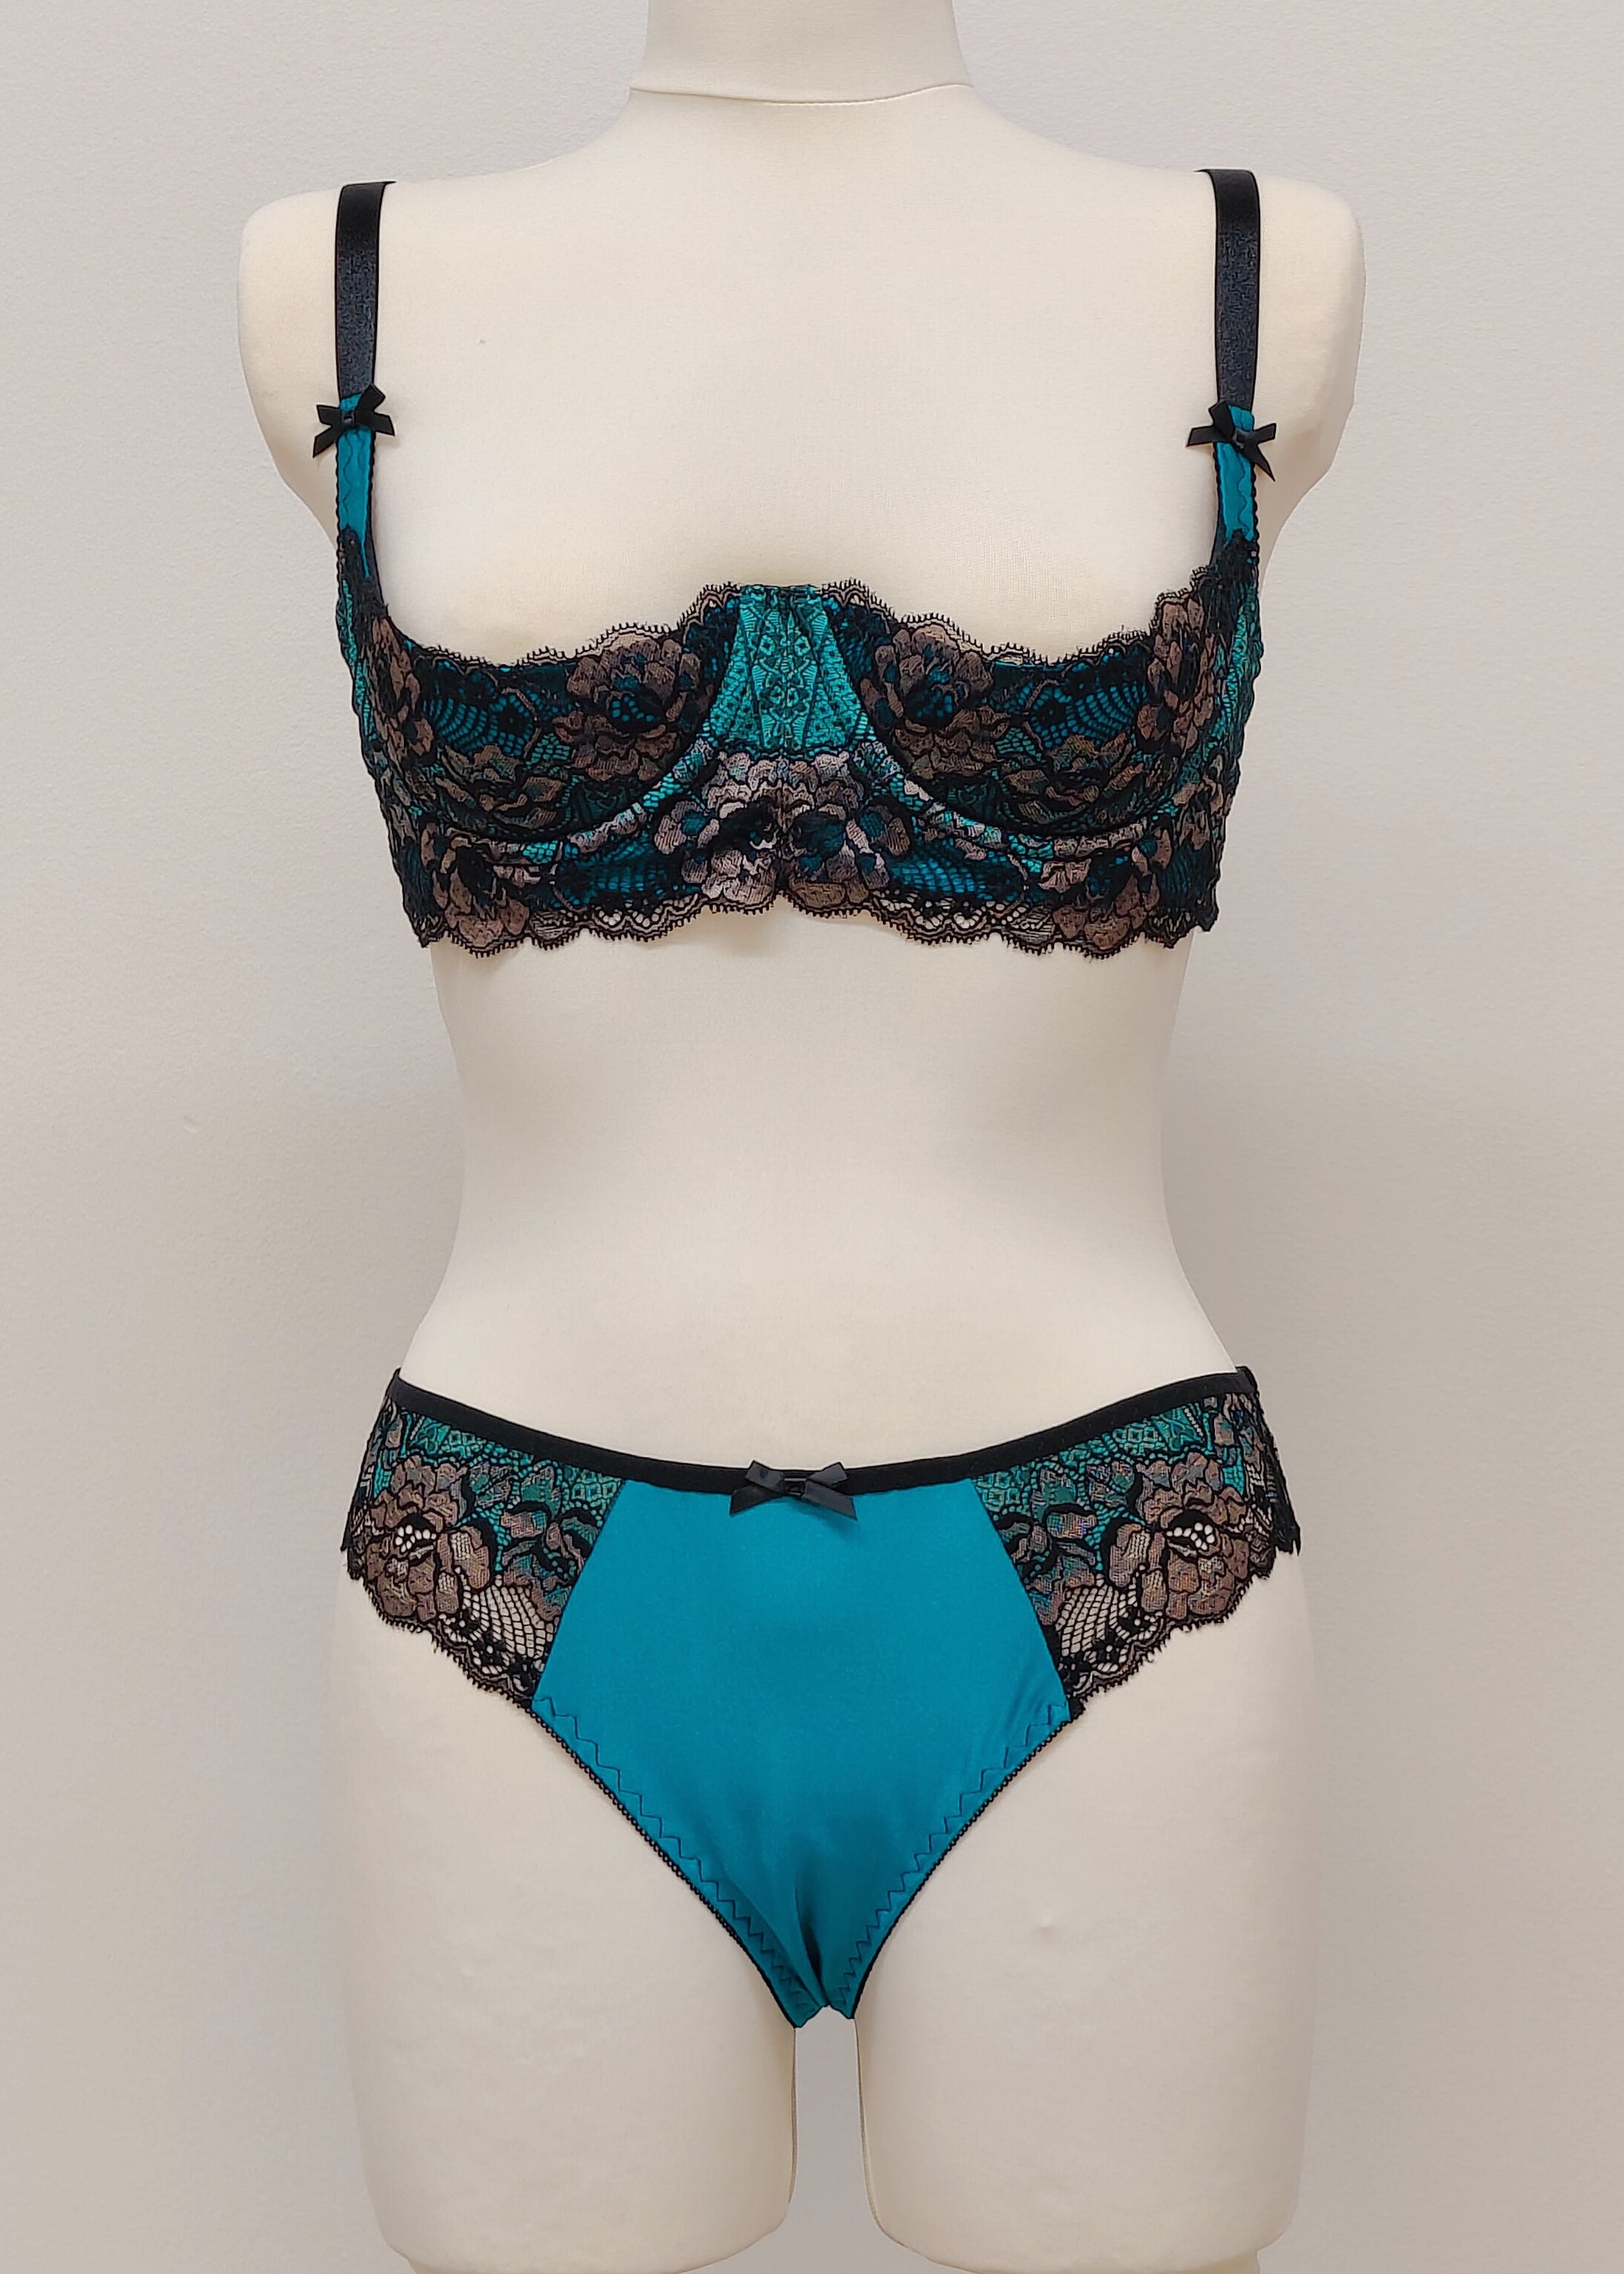 teal and black lace quarter cup bra with panties